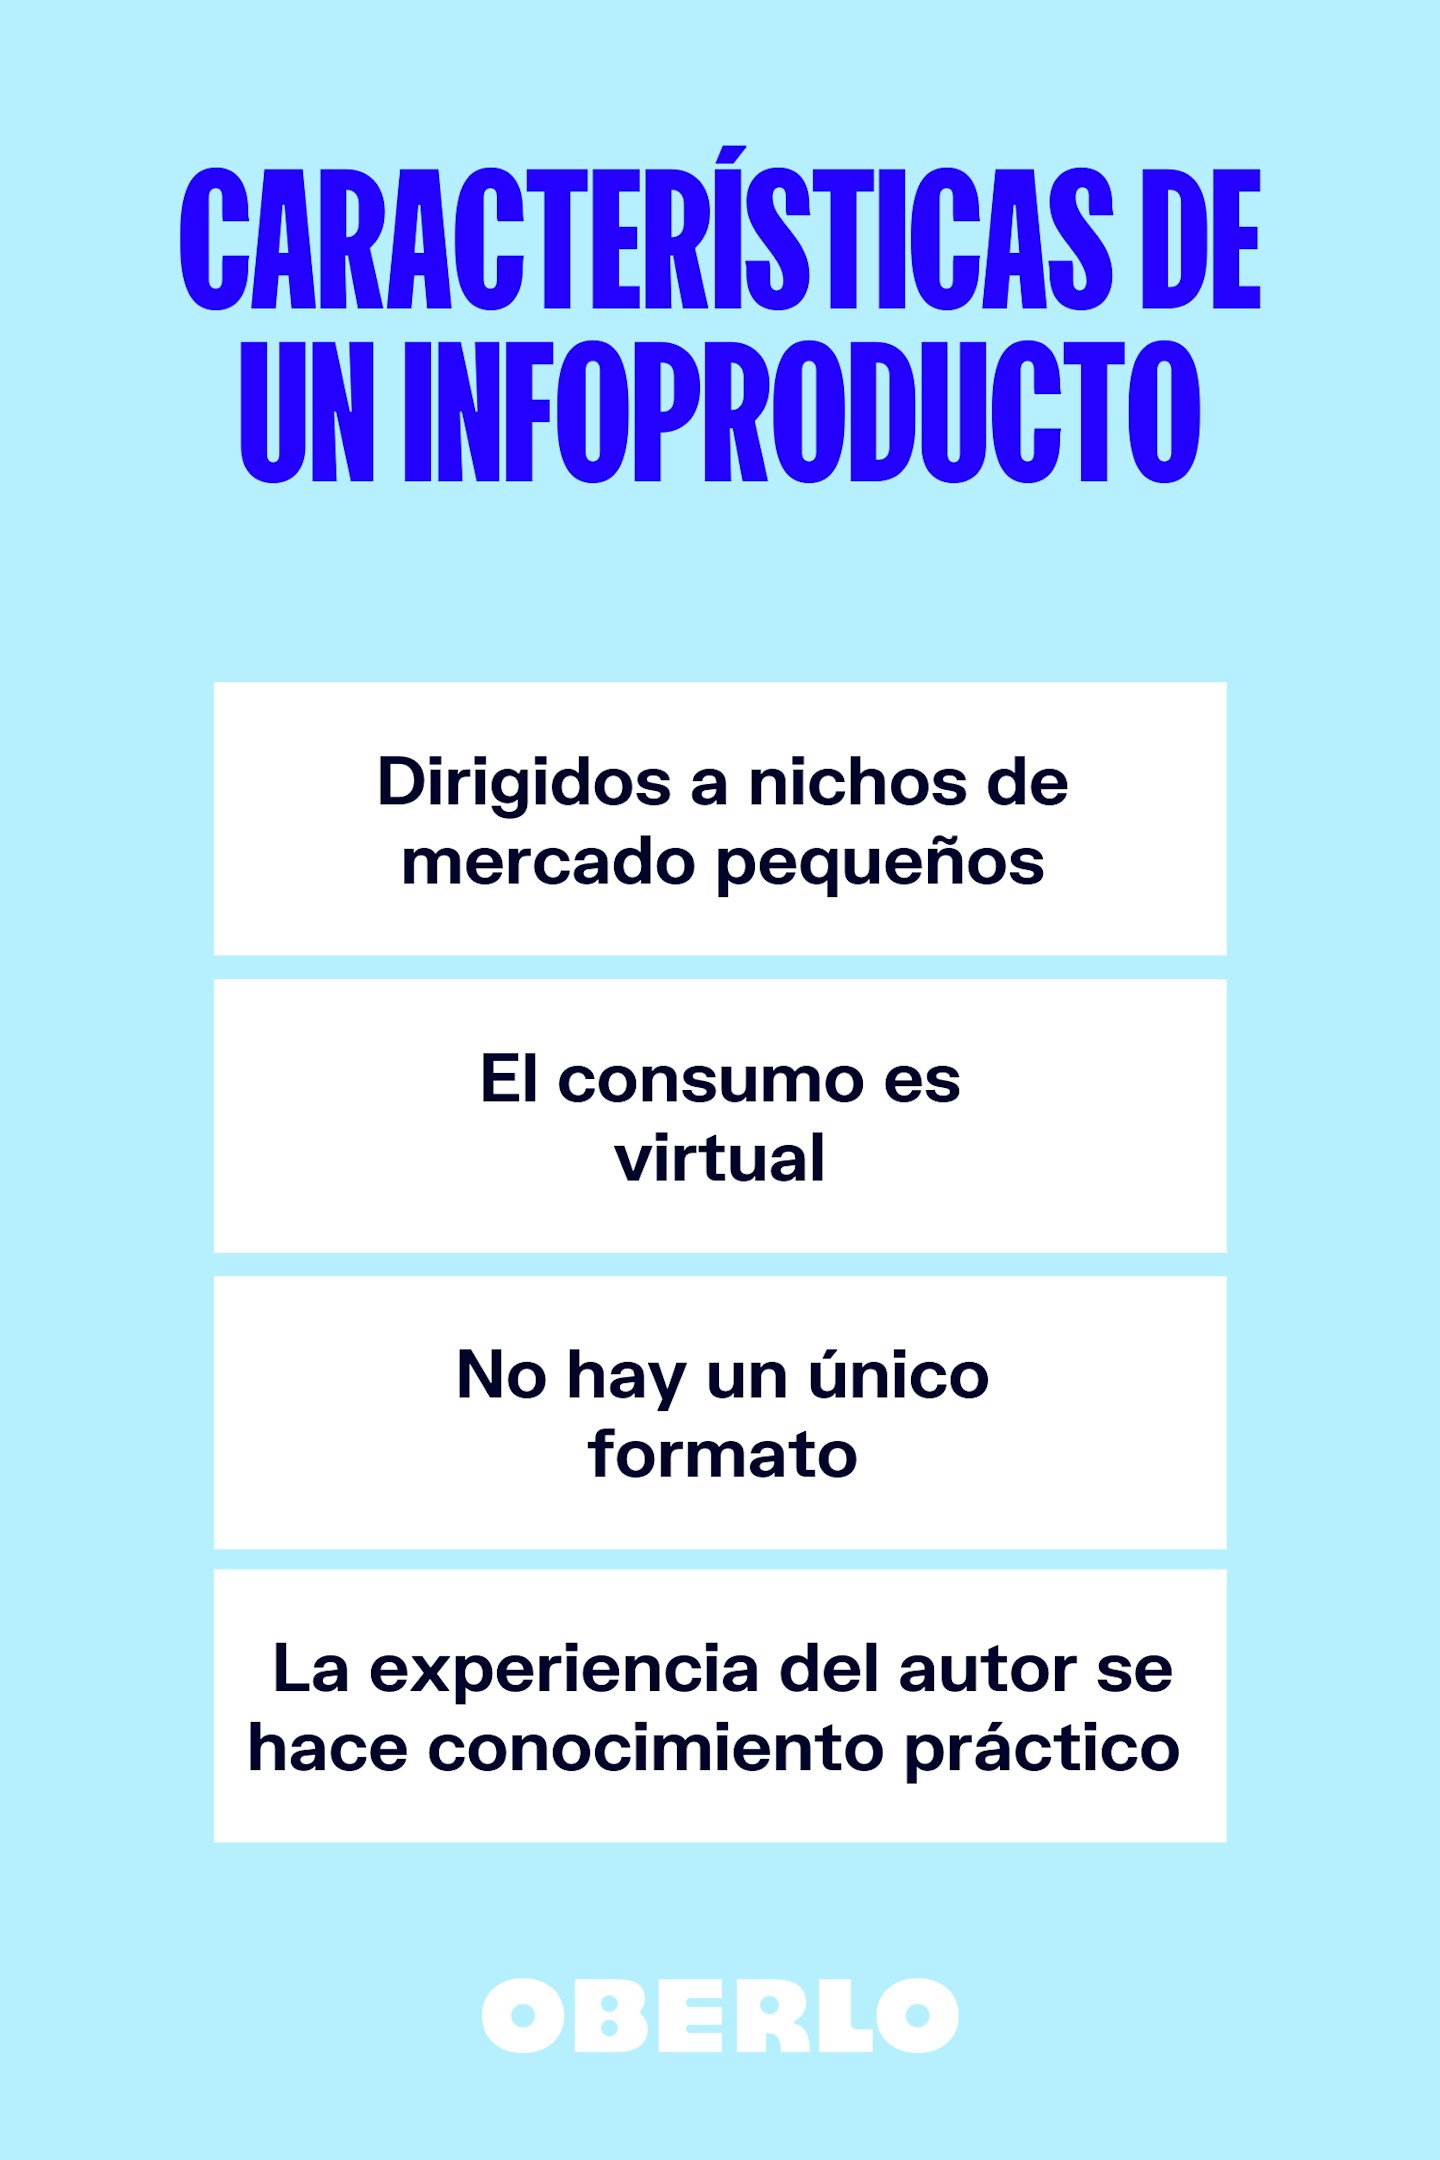 infoproducto